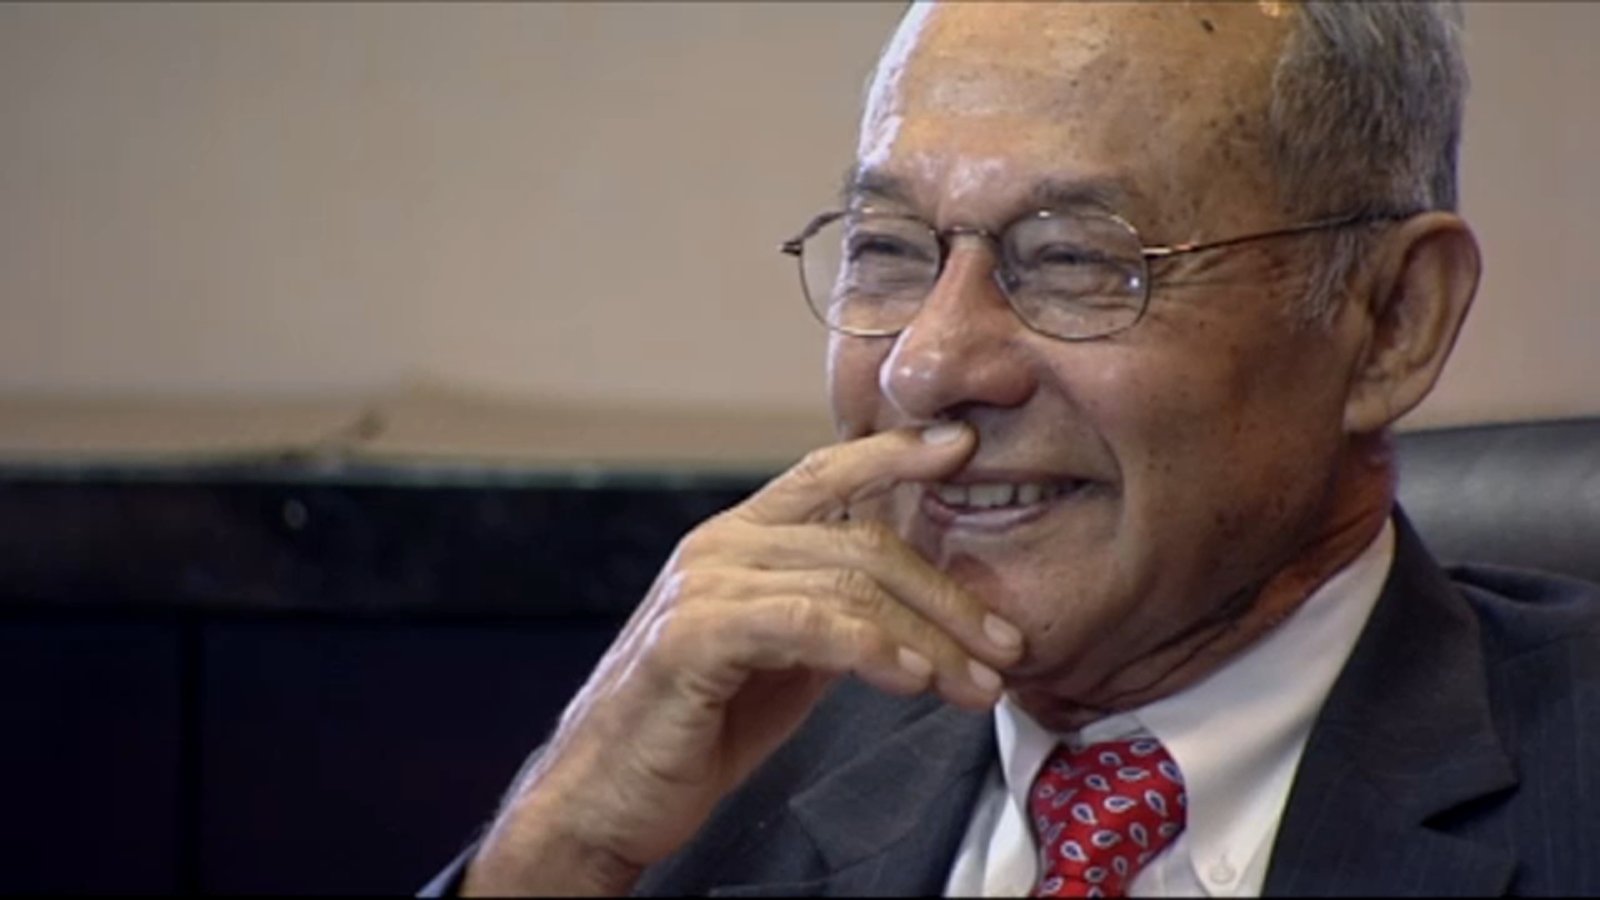 Former Houston City Council member Felix Fraga dies at 94 due to complications from Alzheimer’s, family says [Video]